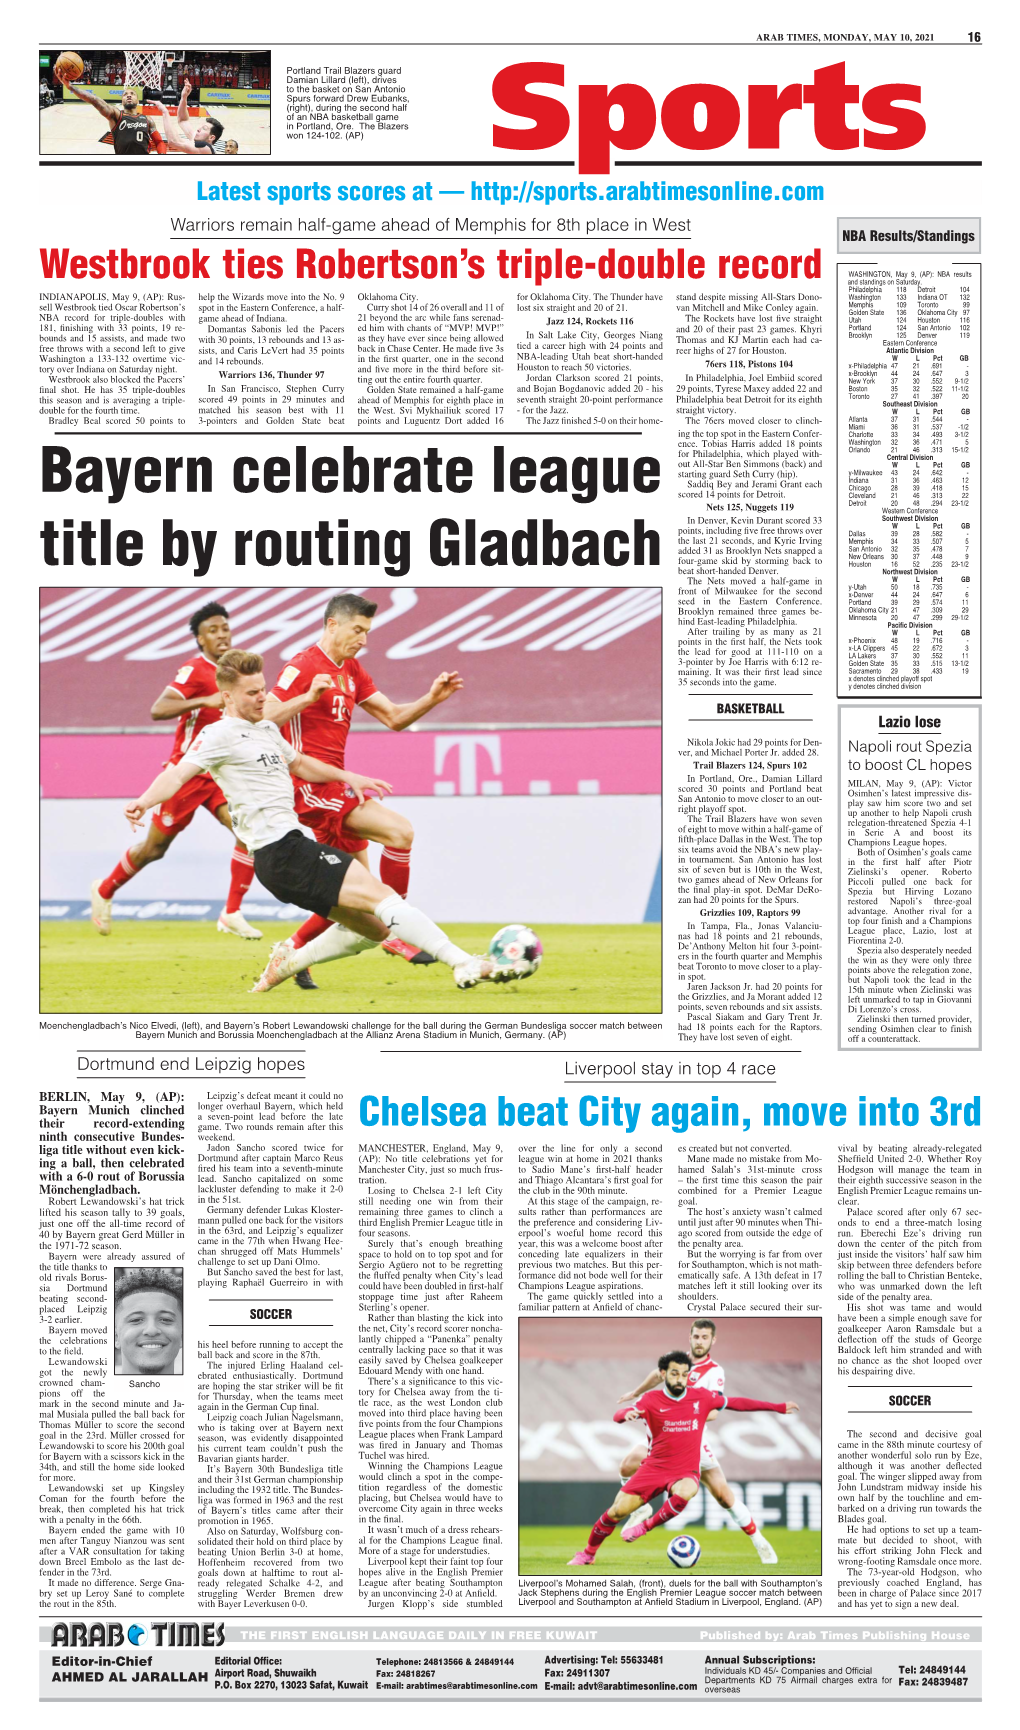 Bayern Celebrate League Title by Routing Gladbach